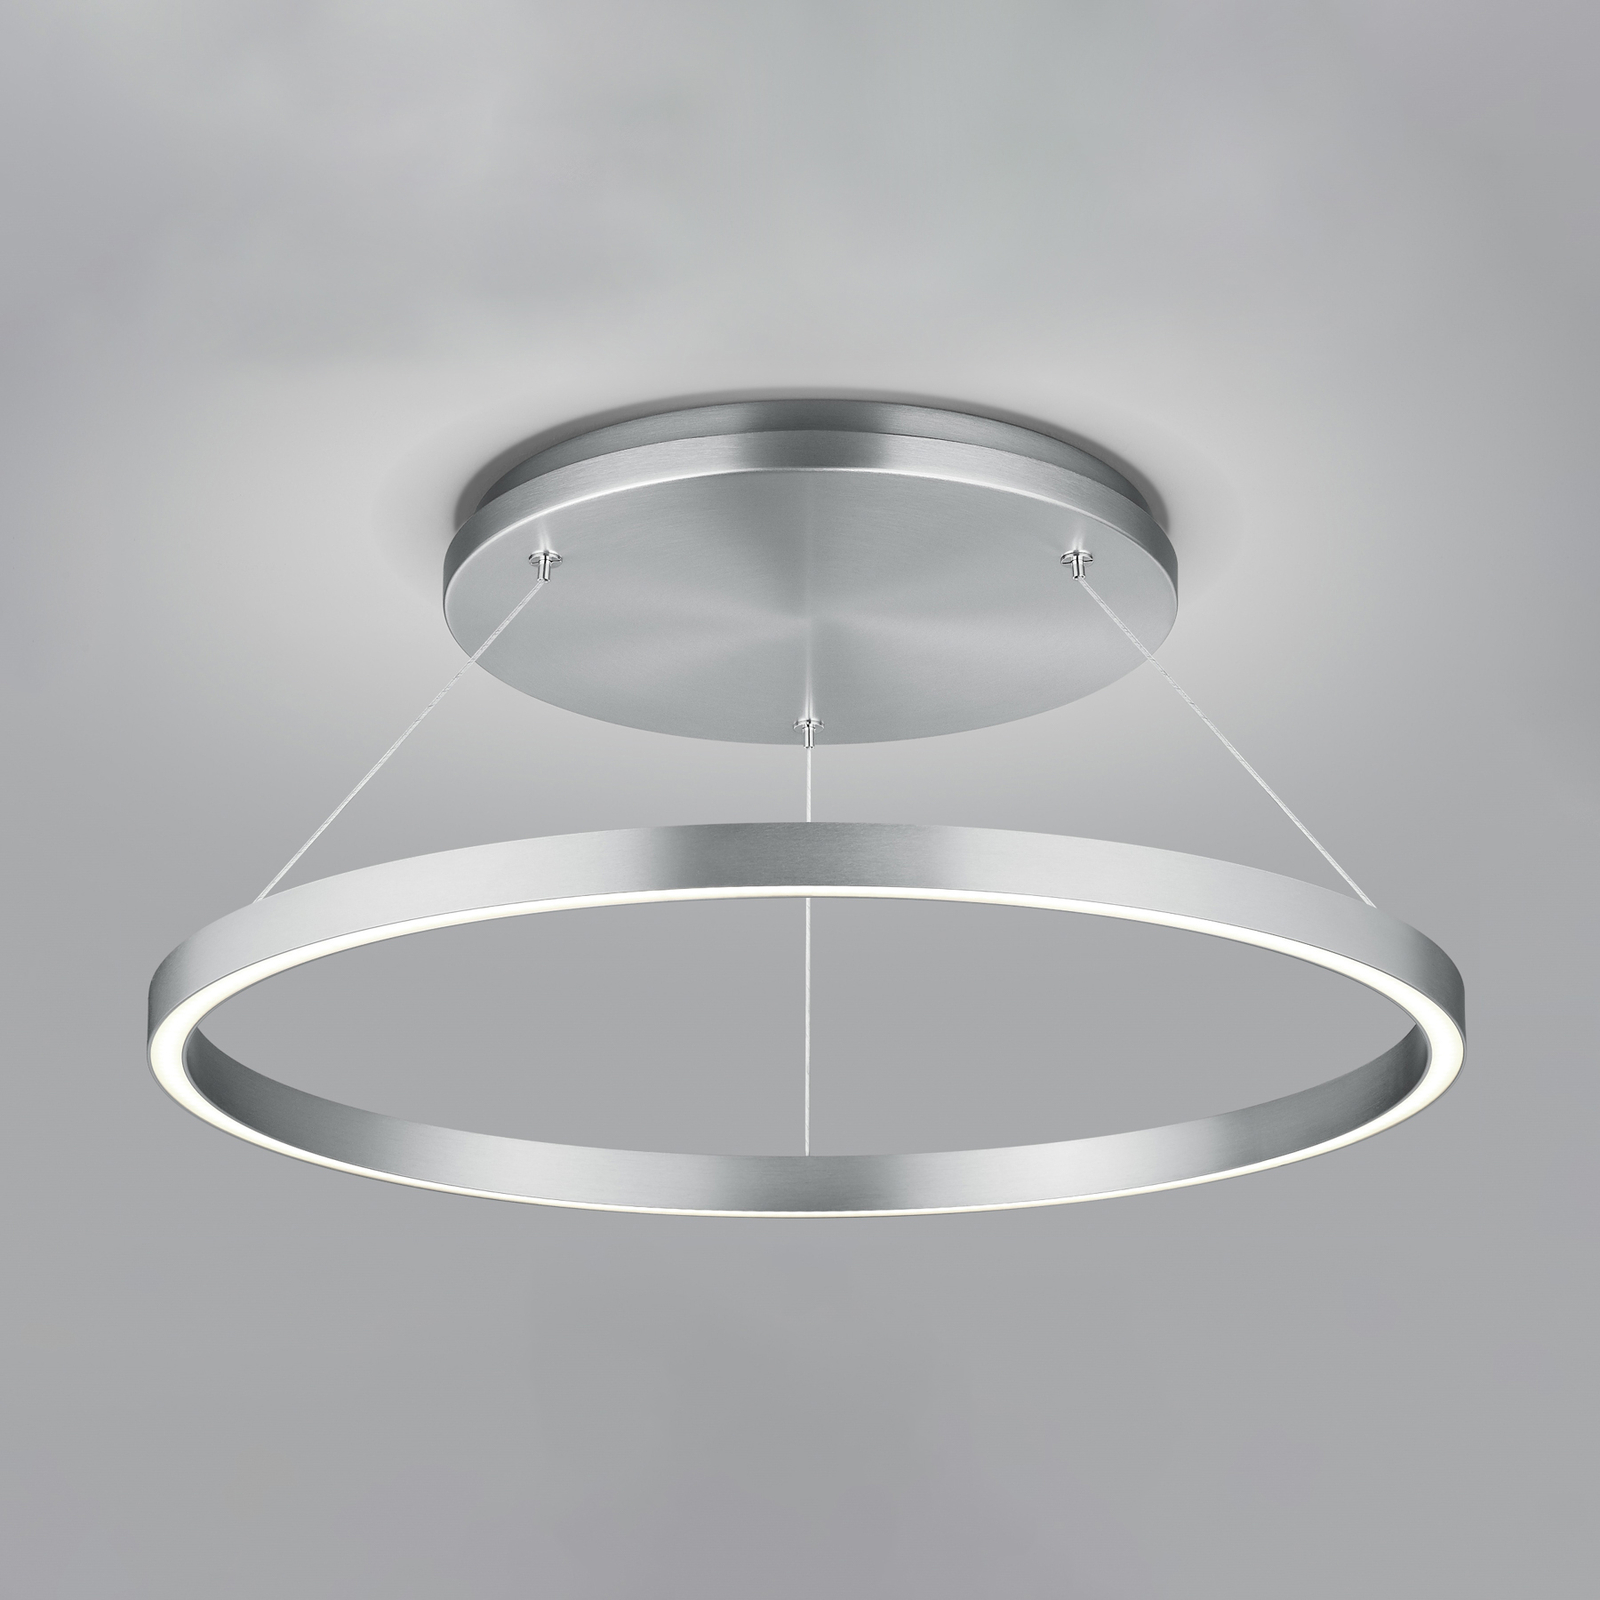 Suspension LED Lisa-D, annulaire, nickel mat